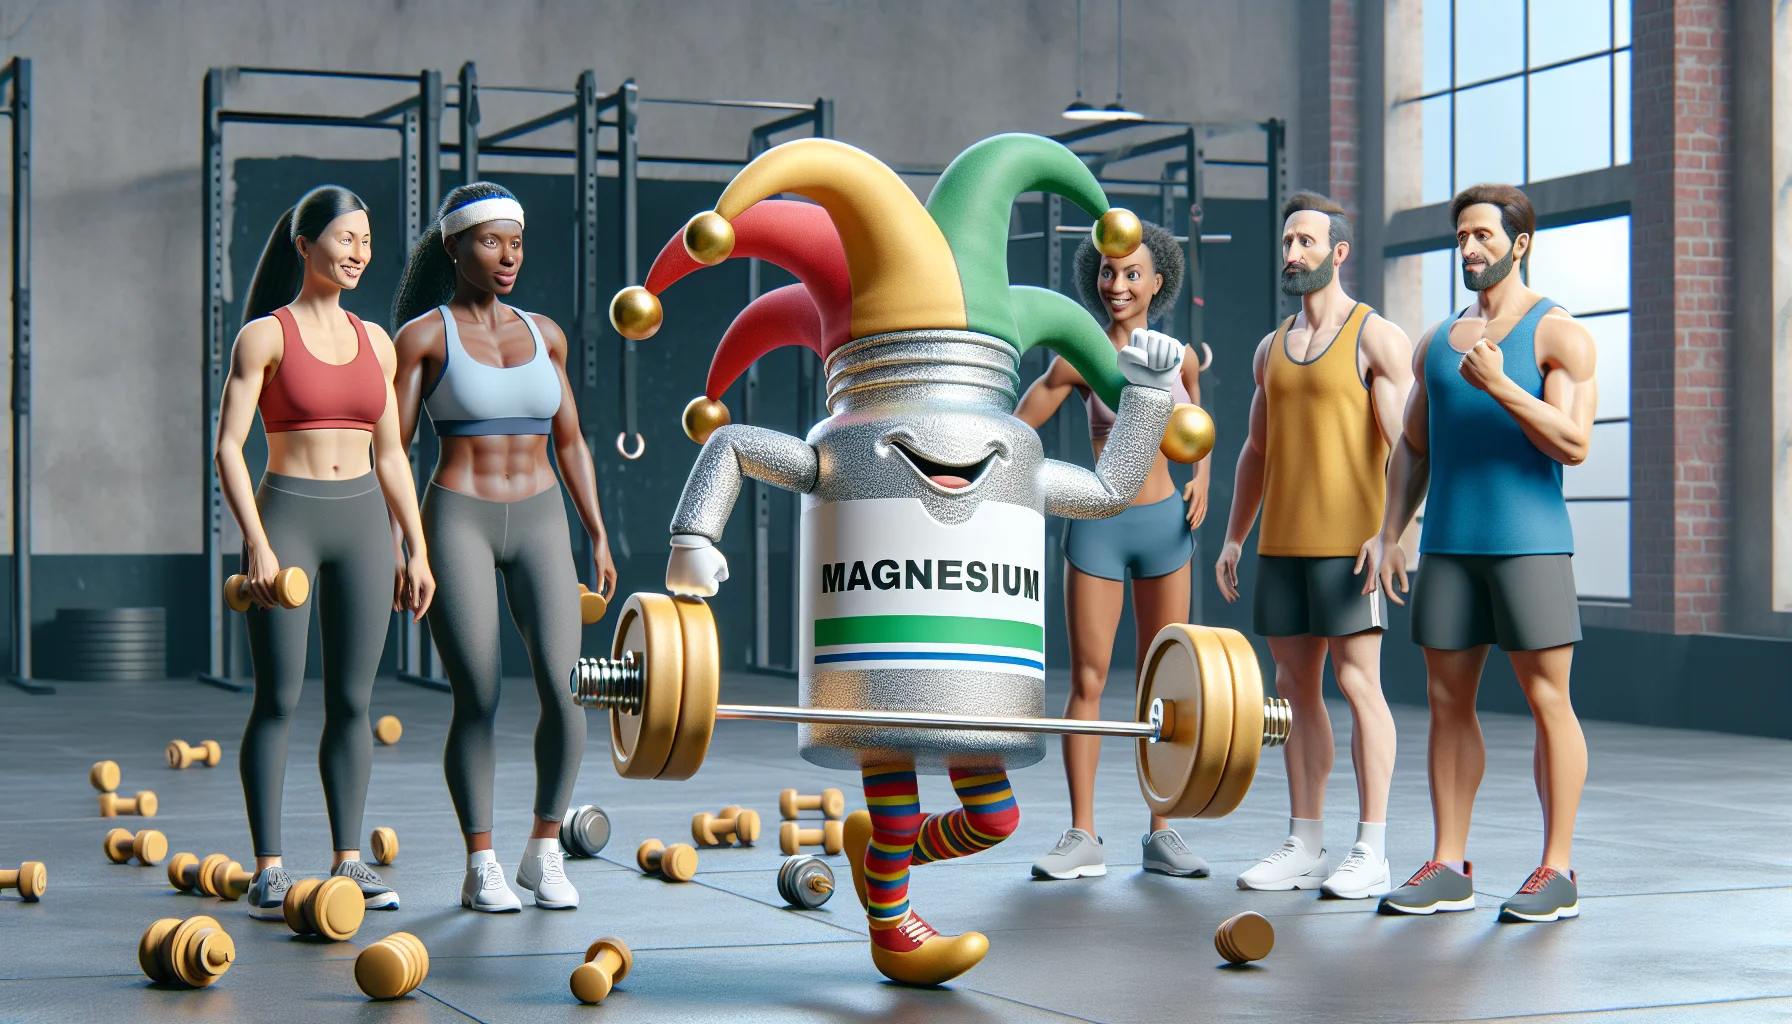 Create a realistic image showcasing a magnesium supplement in a humorous scenario. The supplement is personified, dressed in a jester's outfit, hopping around energetically, and lifting small barbells with ease, enticing all spectators around. There are people of different gender and various descents, such as Caucasian, Hispanic, and South Asian, all in athletic attire and looking at the supplements in awe, suggesting they are for sports enthusiasts.